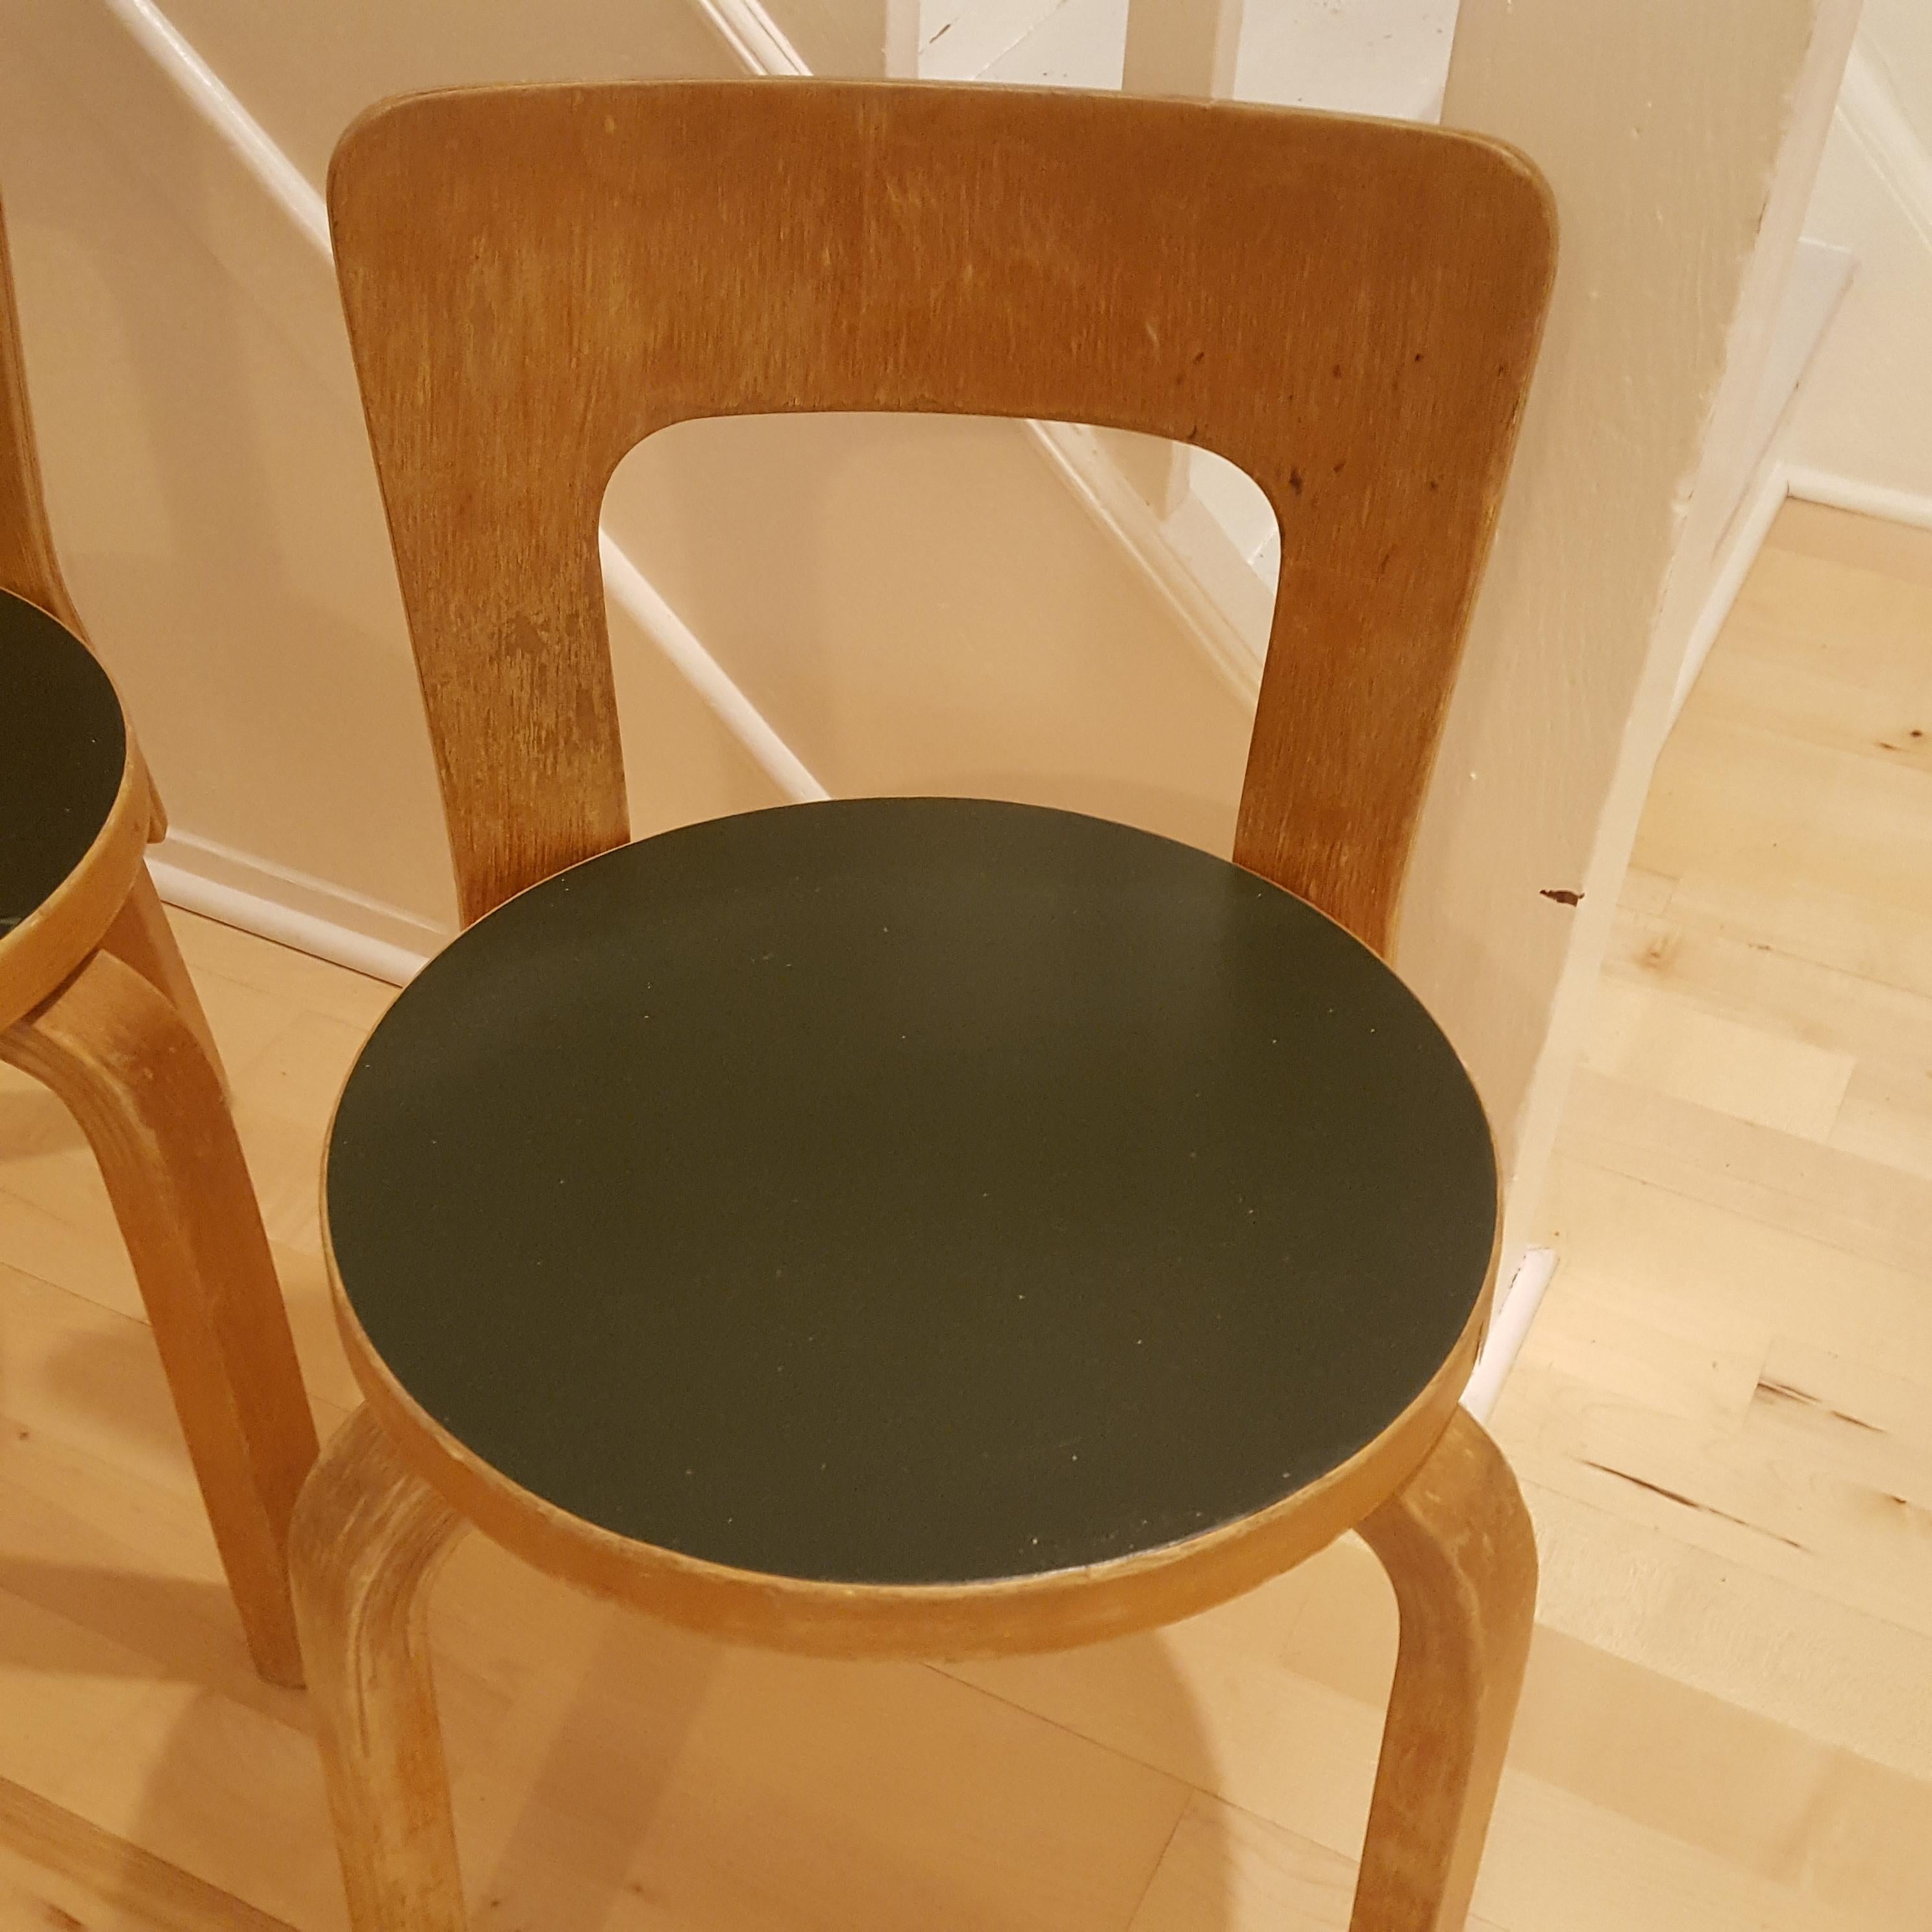 A stunning pair of Vintage Alvar Aalto/Artek N65 Children's chairs. The green linoleum seats are in great condition. Lovely patina and still very solid.